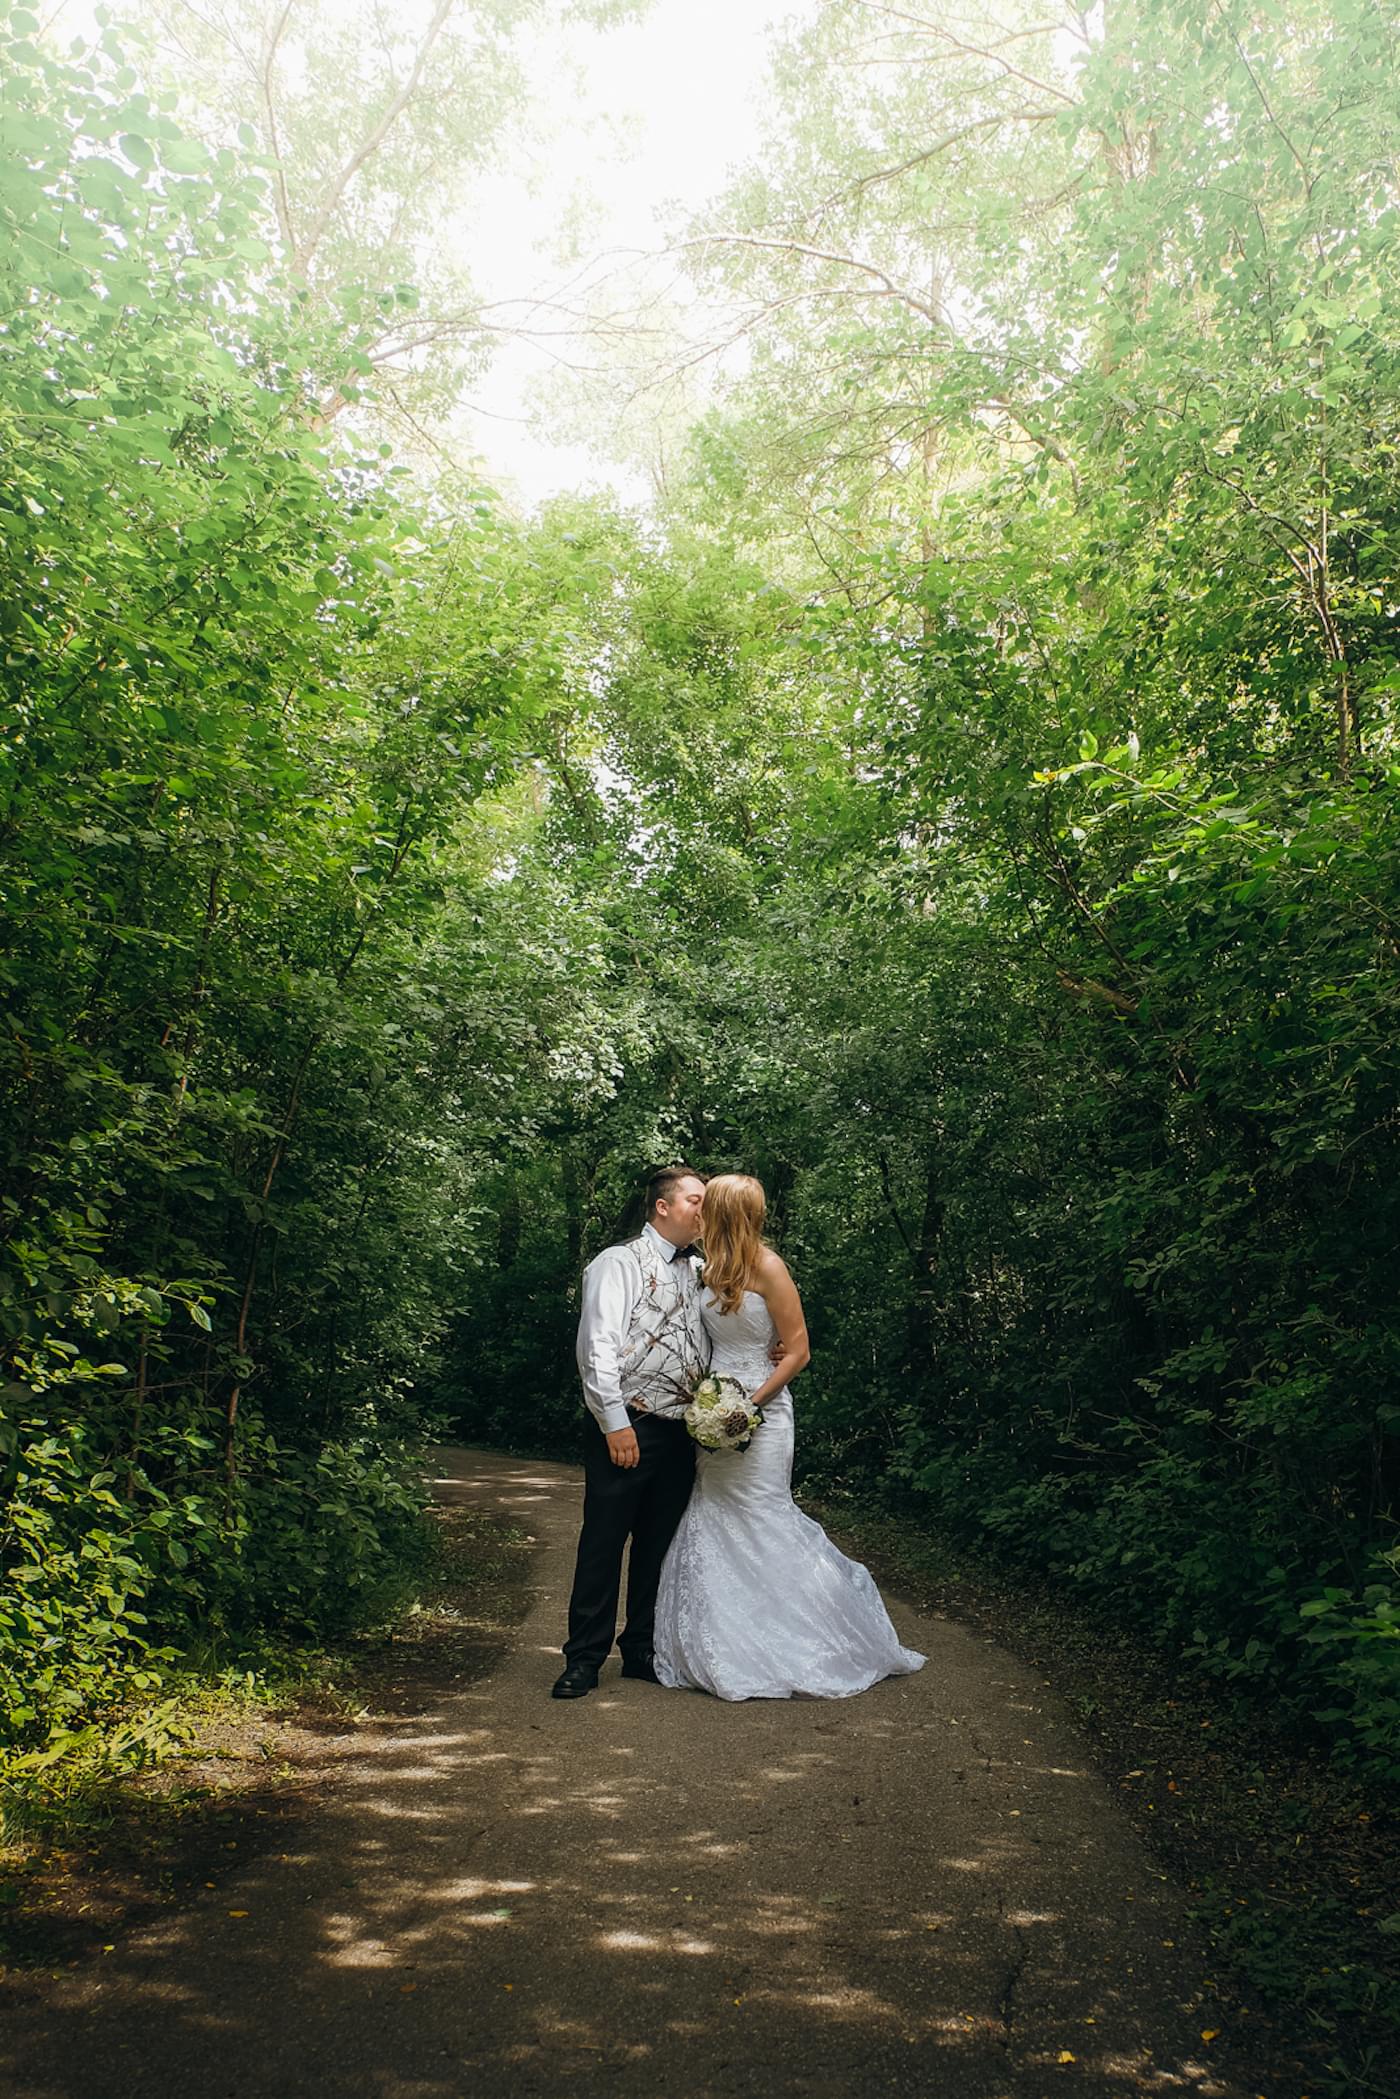 Wedding and engagement photos by Toronto based photographer Darrin Henein.